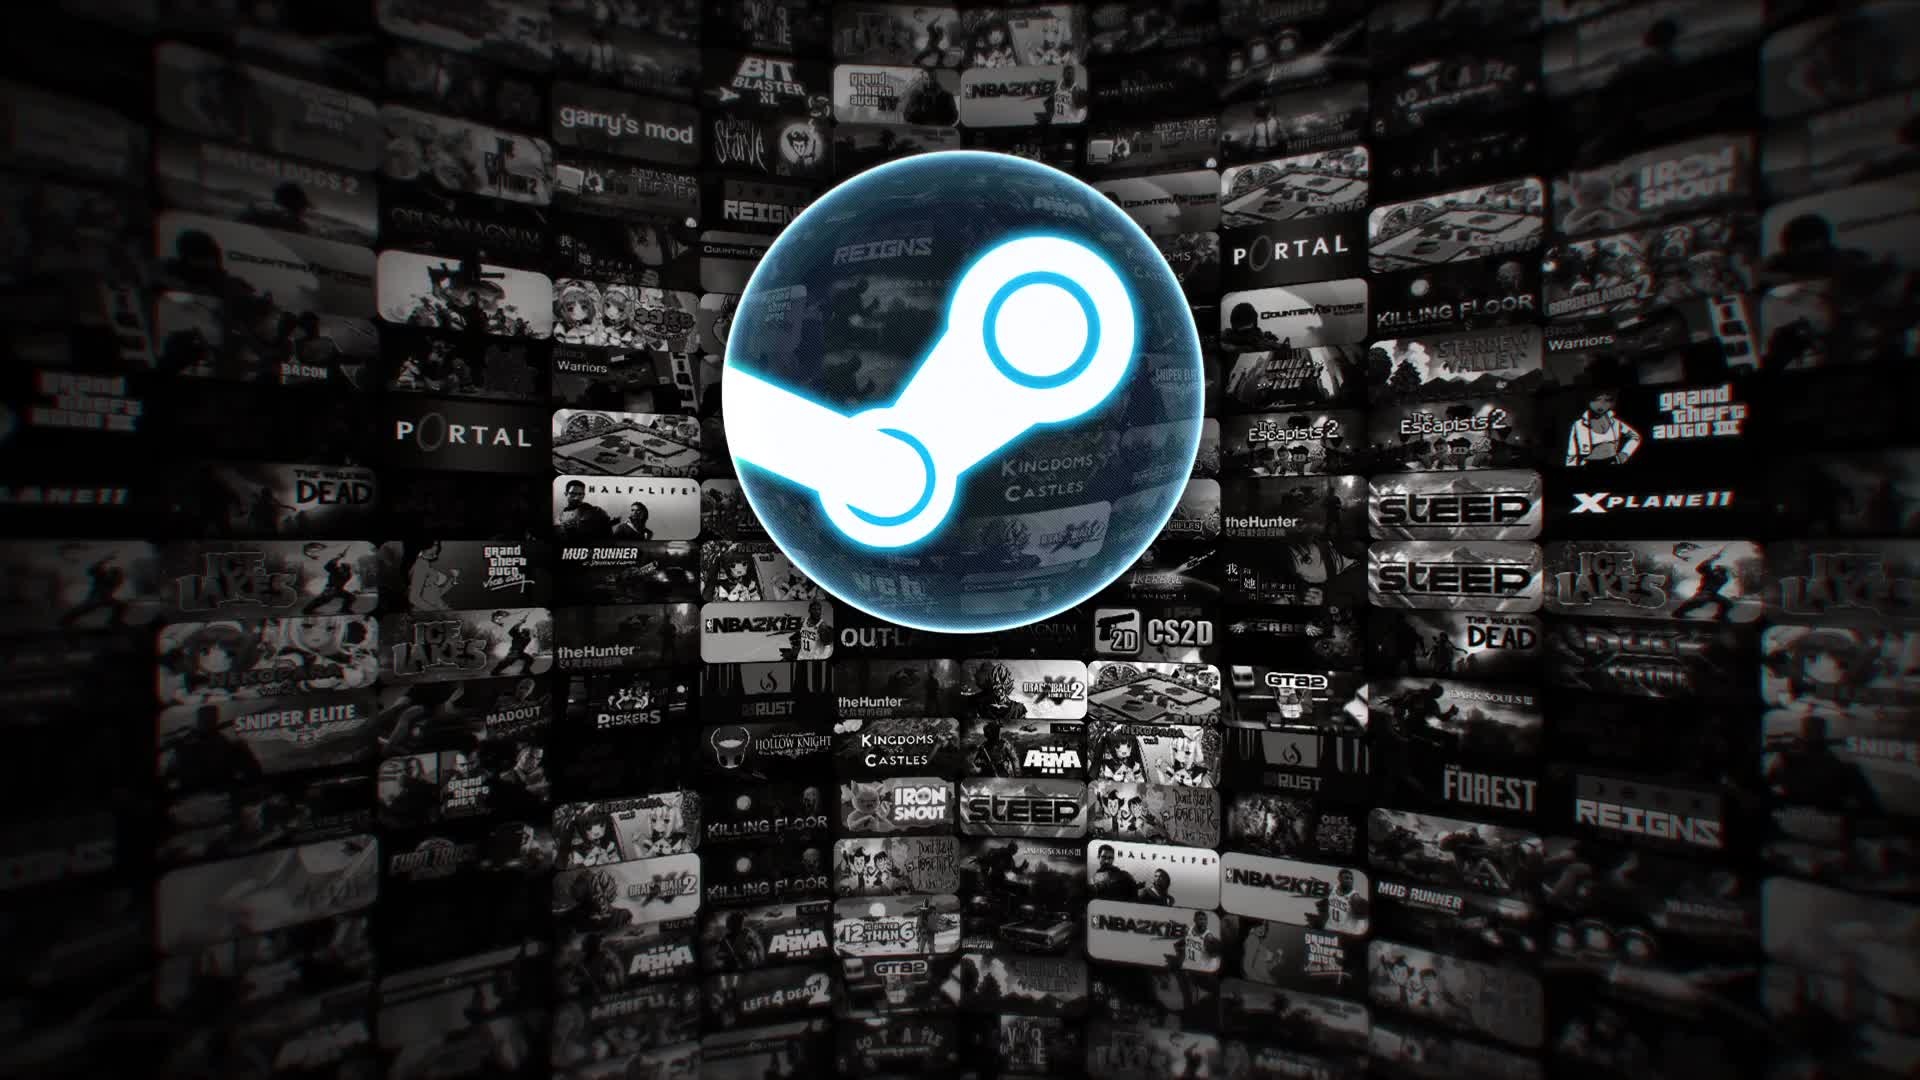 Steam: A digital distribution service for video games that features a vibrant community. 1920x1080 Full HD Wallpaper.